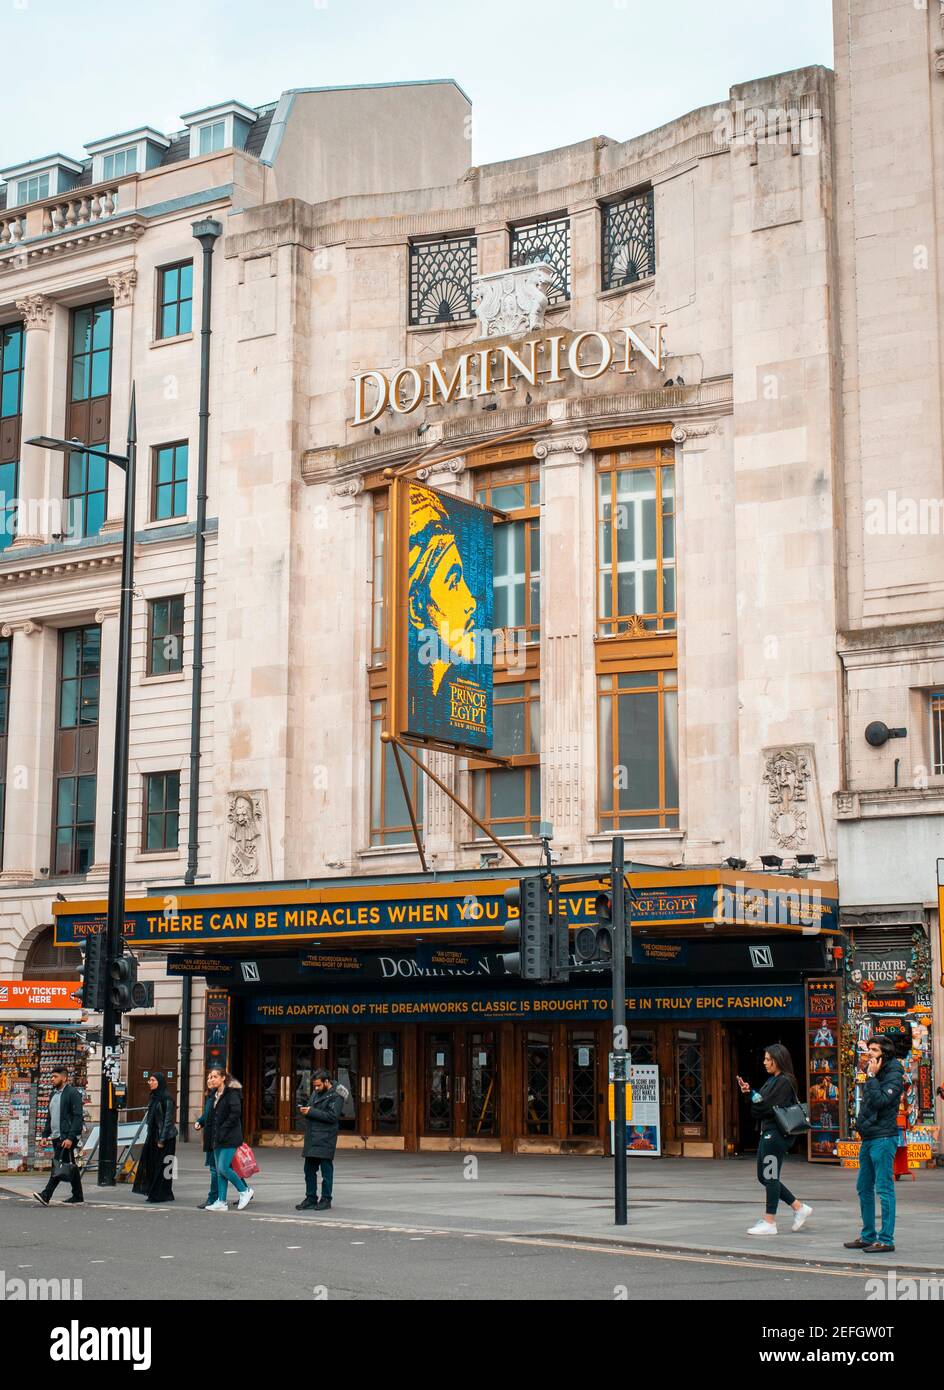 The Dominion Theatre showing 'The Prince of Egypt' in London's West End is closed until notice due to Coronavirus outbreak, London, England, Mar 2020 Stock Photo